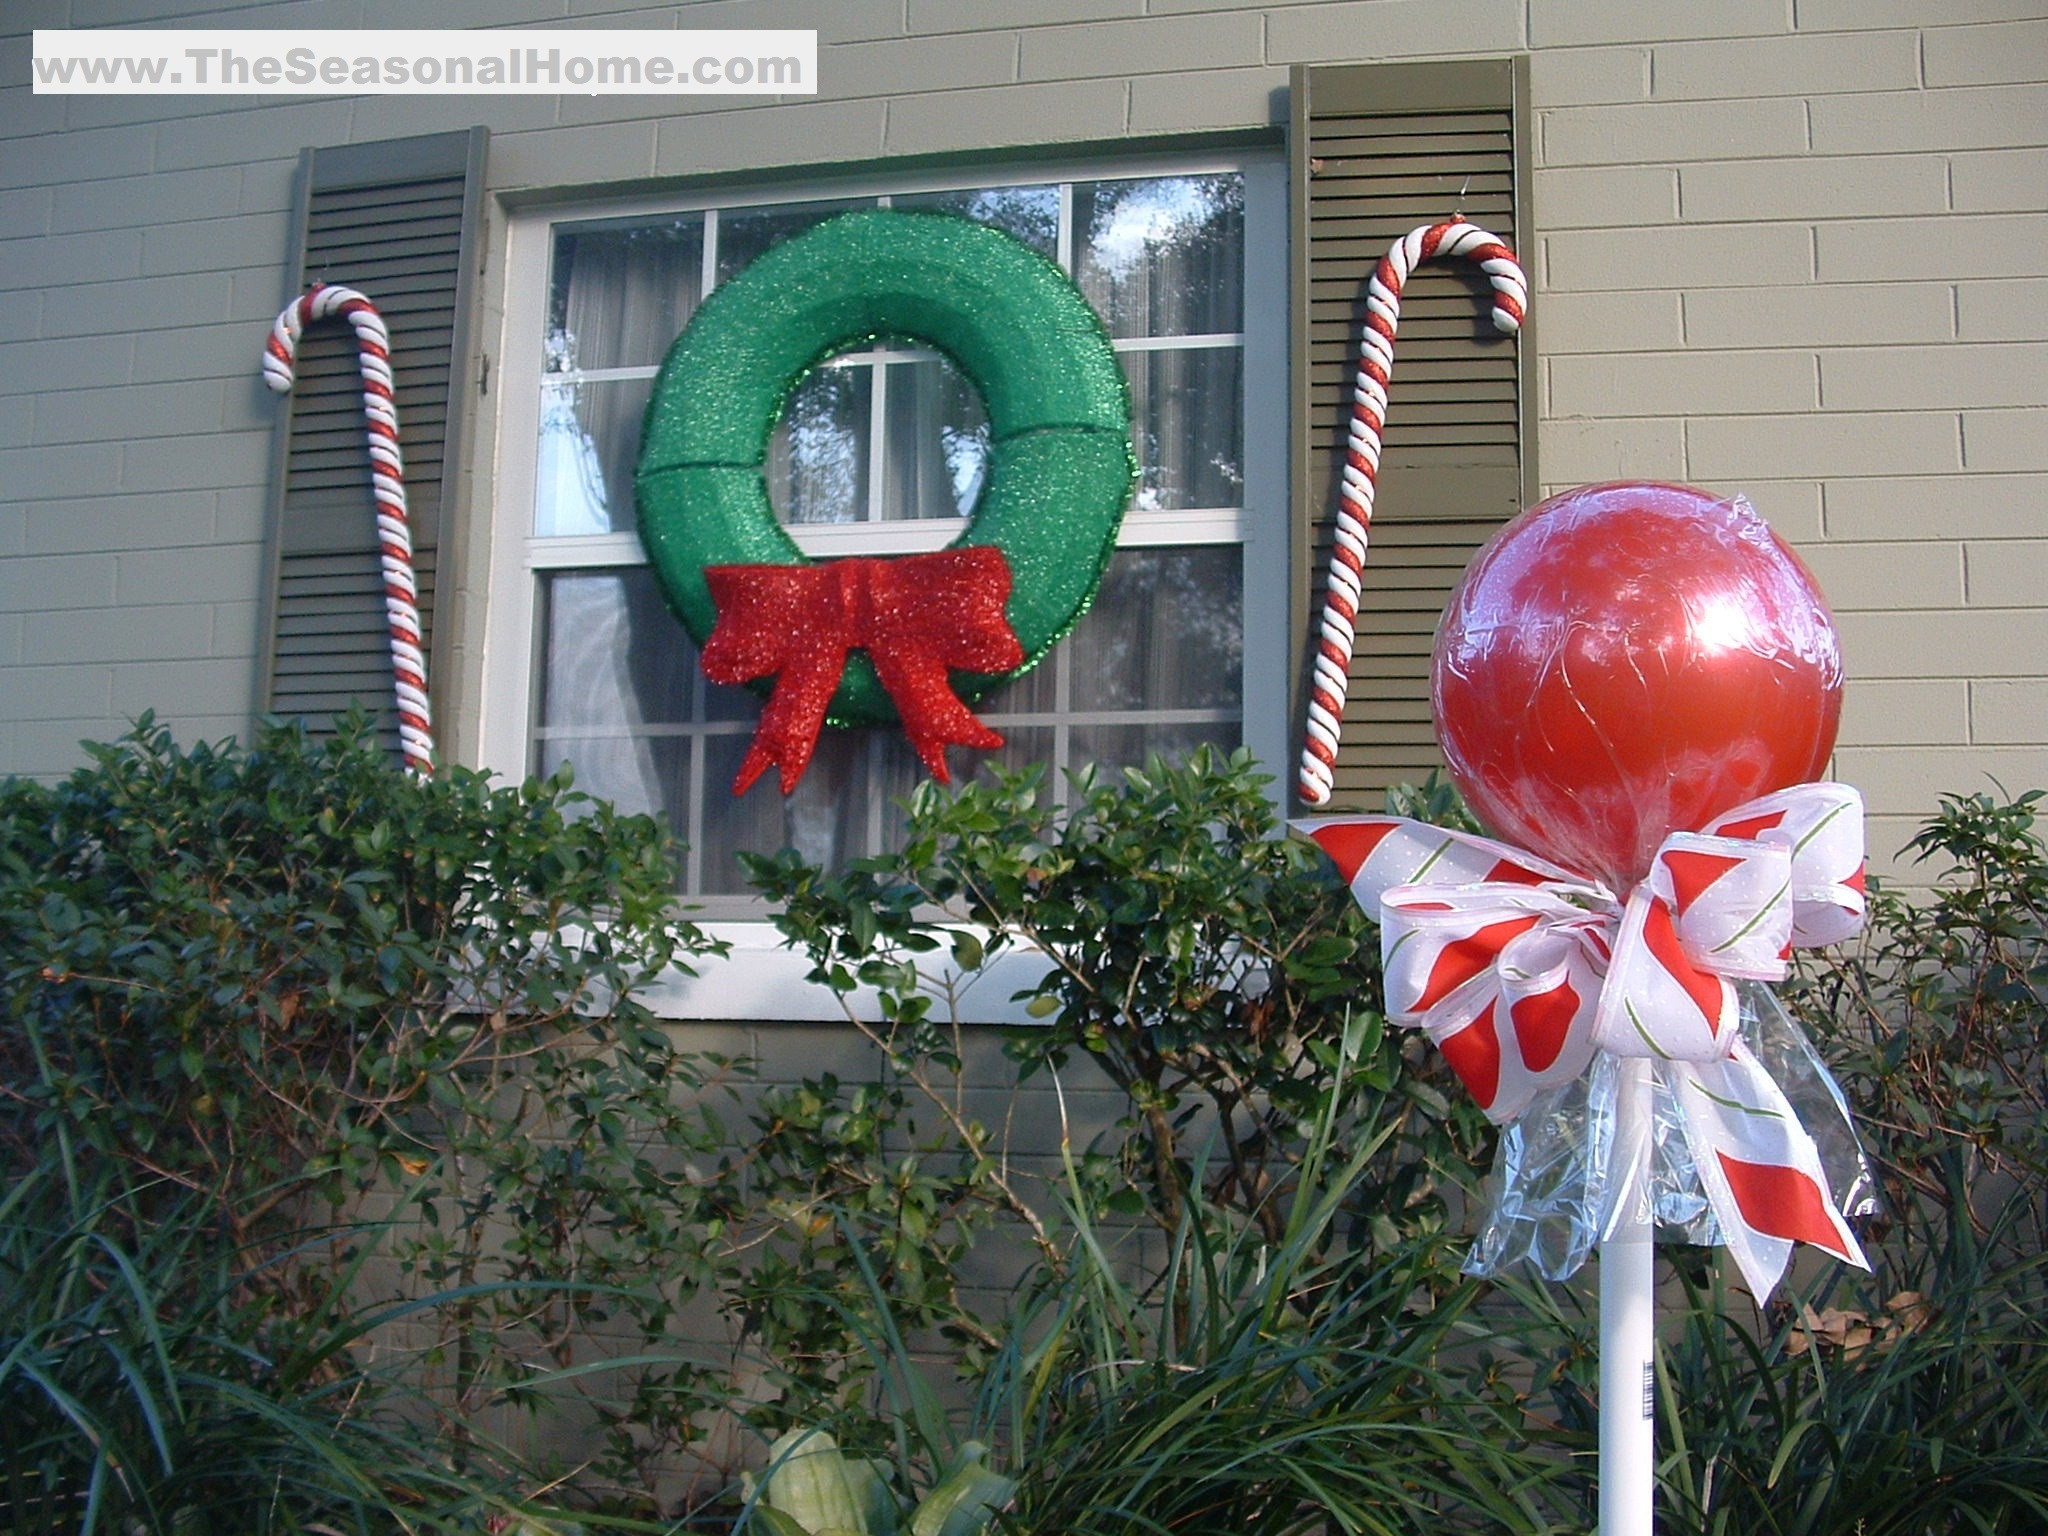 Build Outdoor Christmas Decorations
 Outdoor “CANDY” A Christmas Decorating Idea The